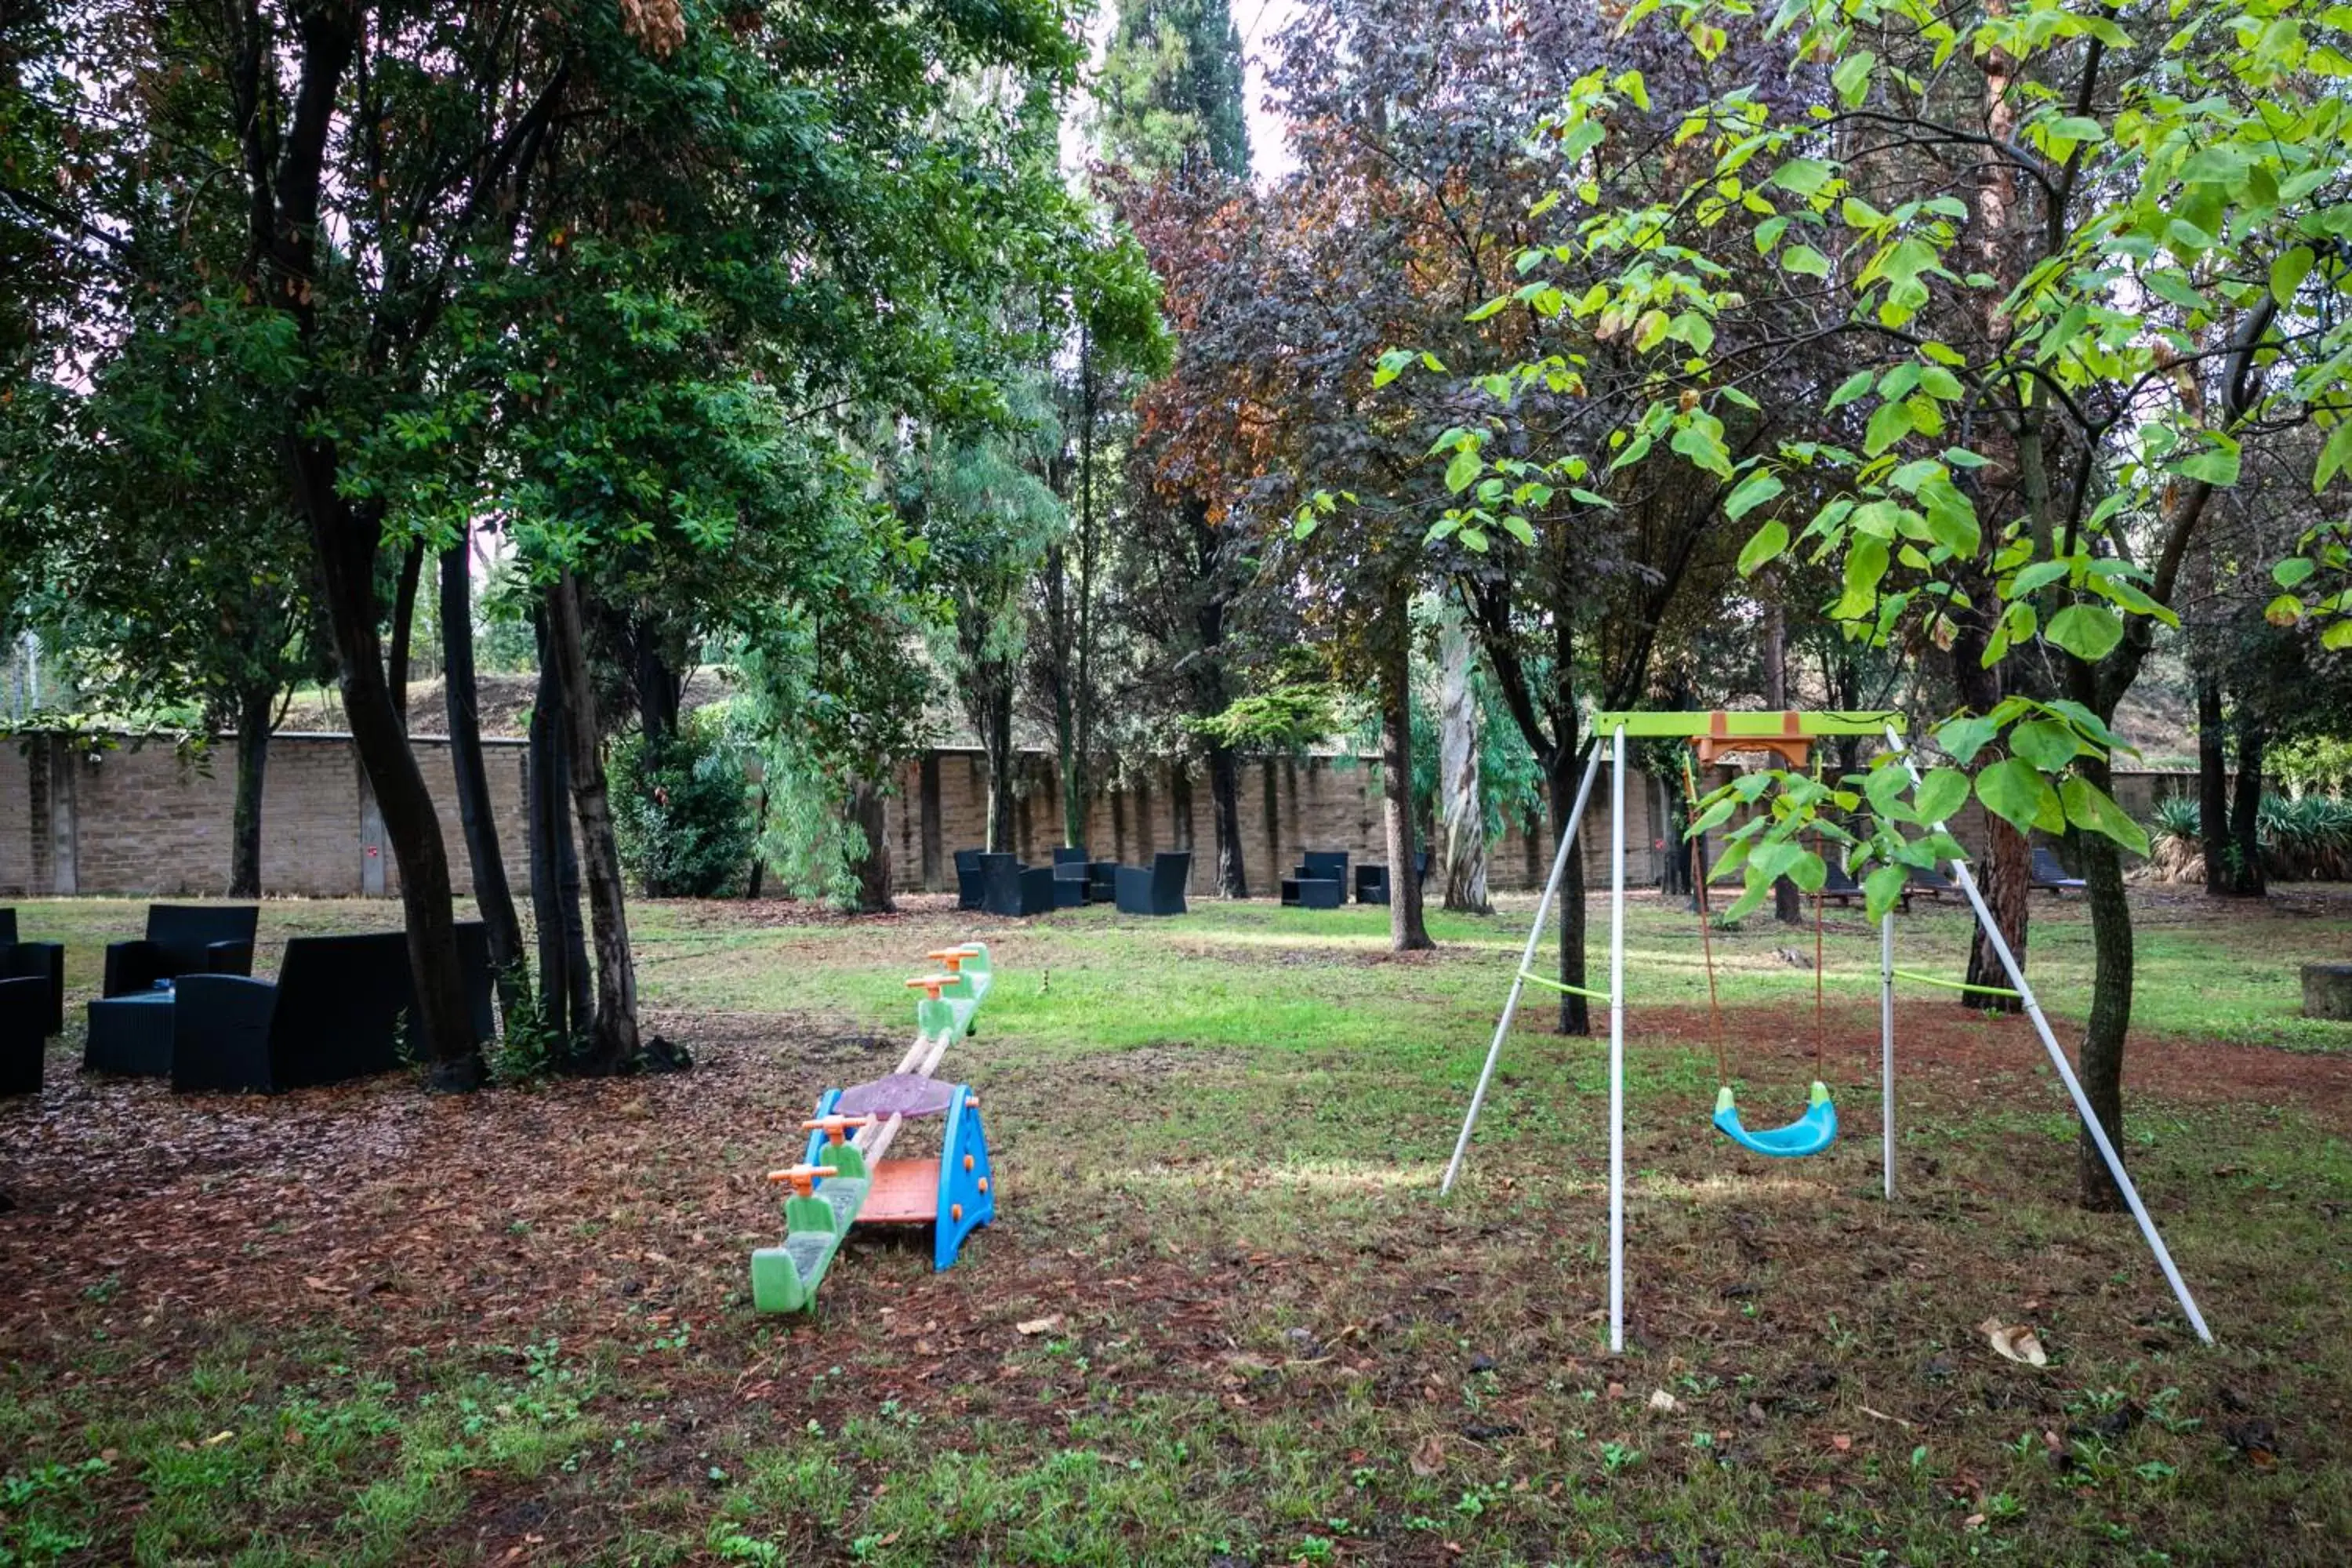 Property building, Children's Play Area in Garden Area Roma Eur